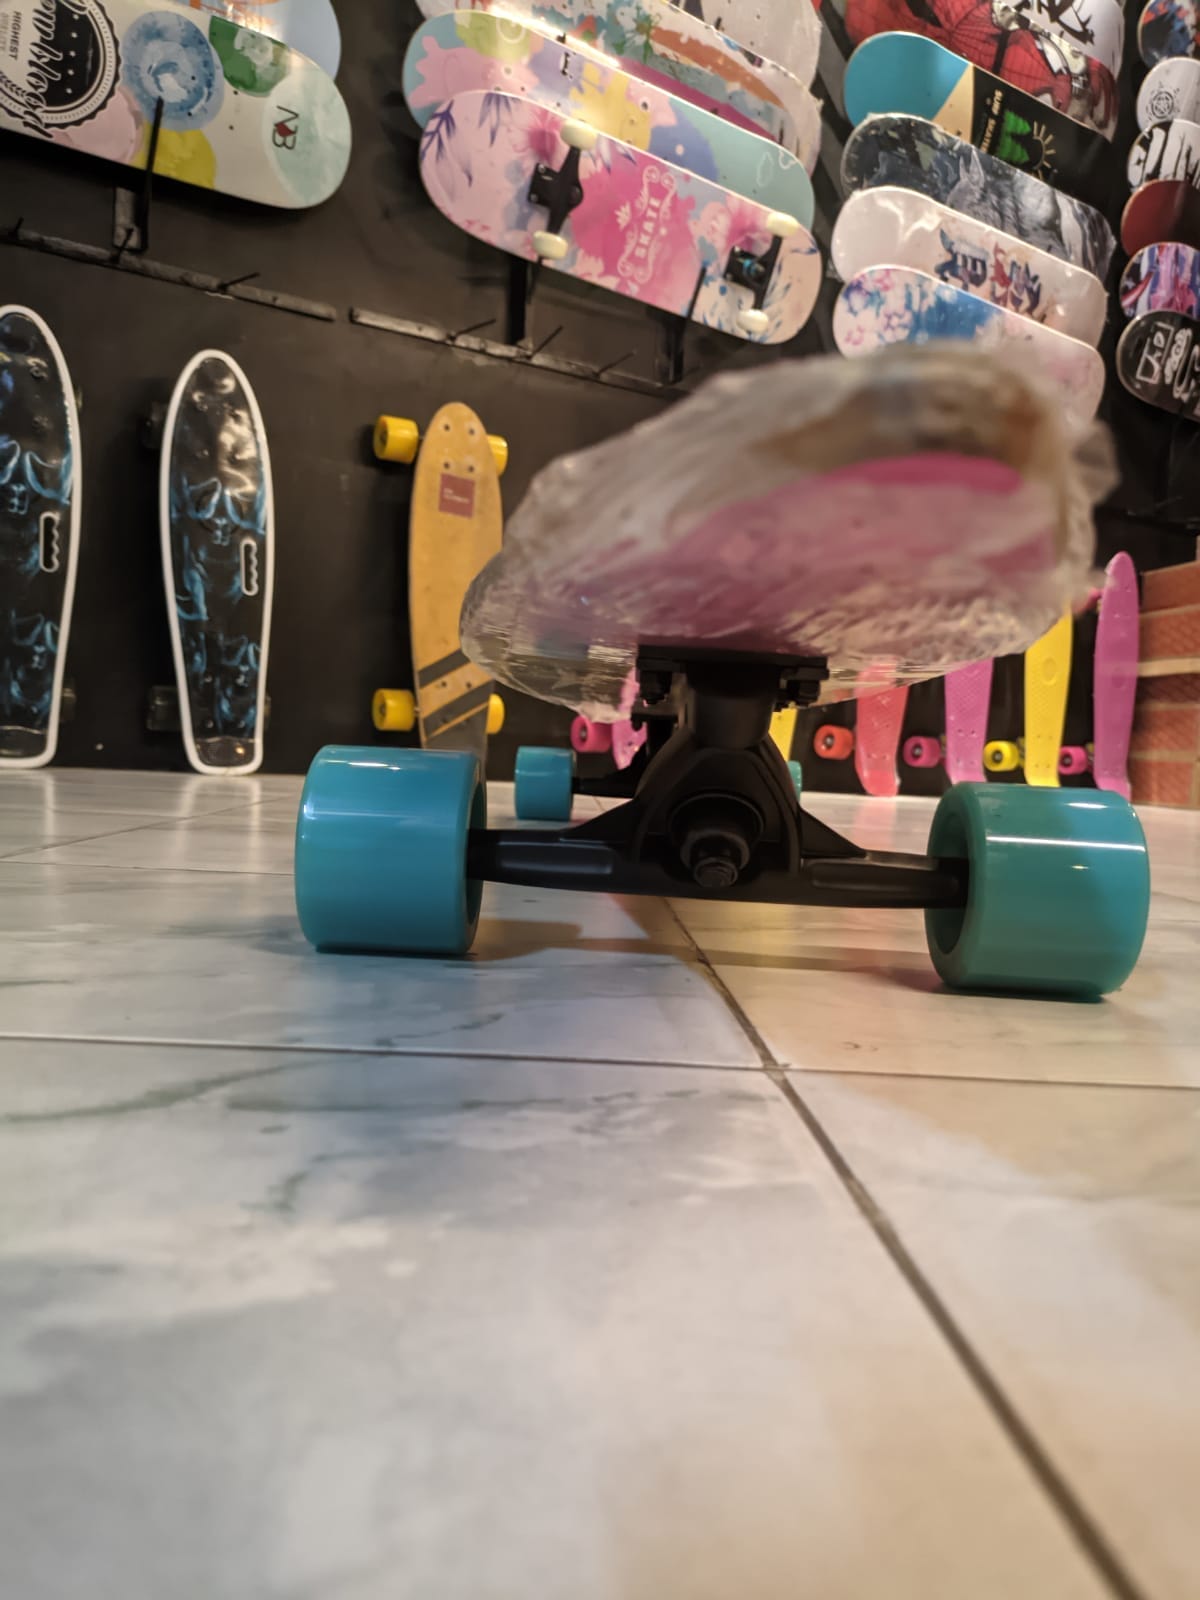 Can I Use A Pintail Longboard For Tricks And Stunts?